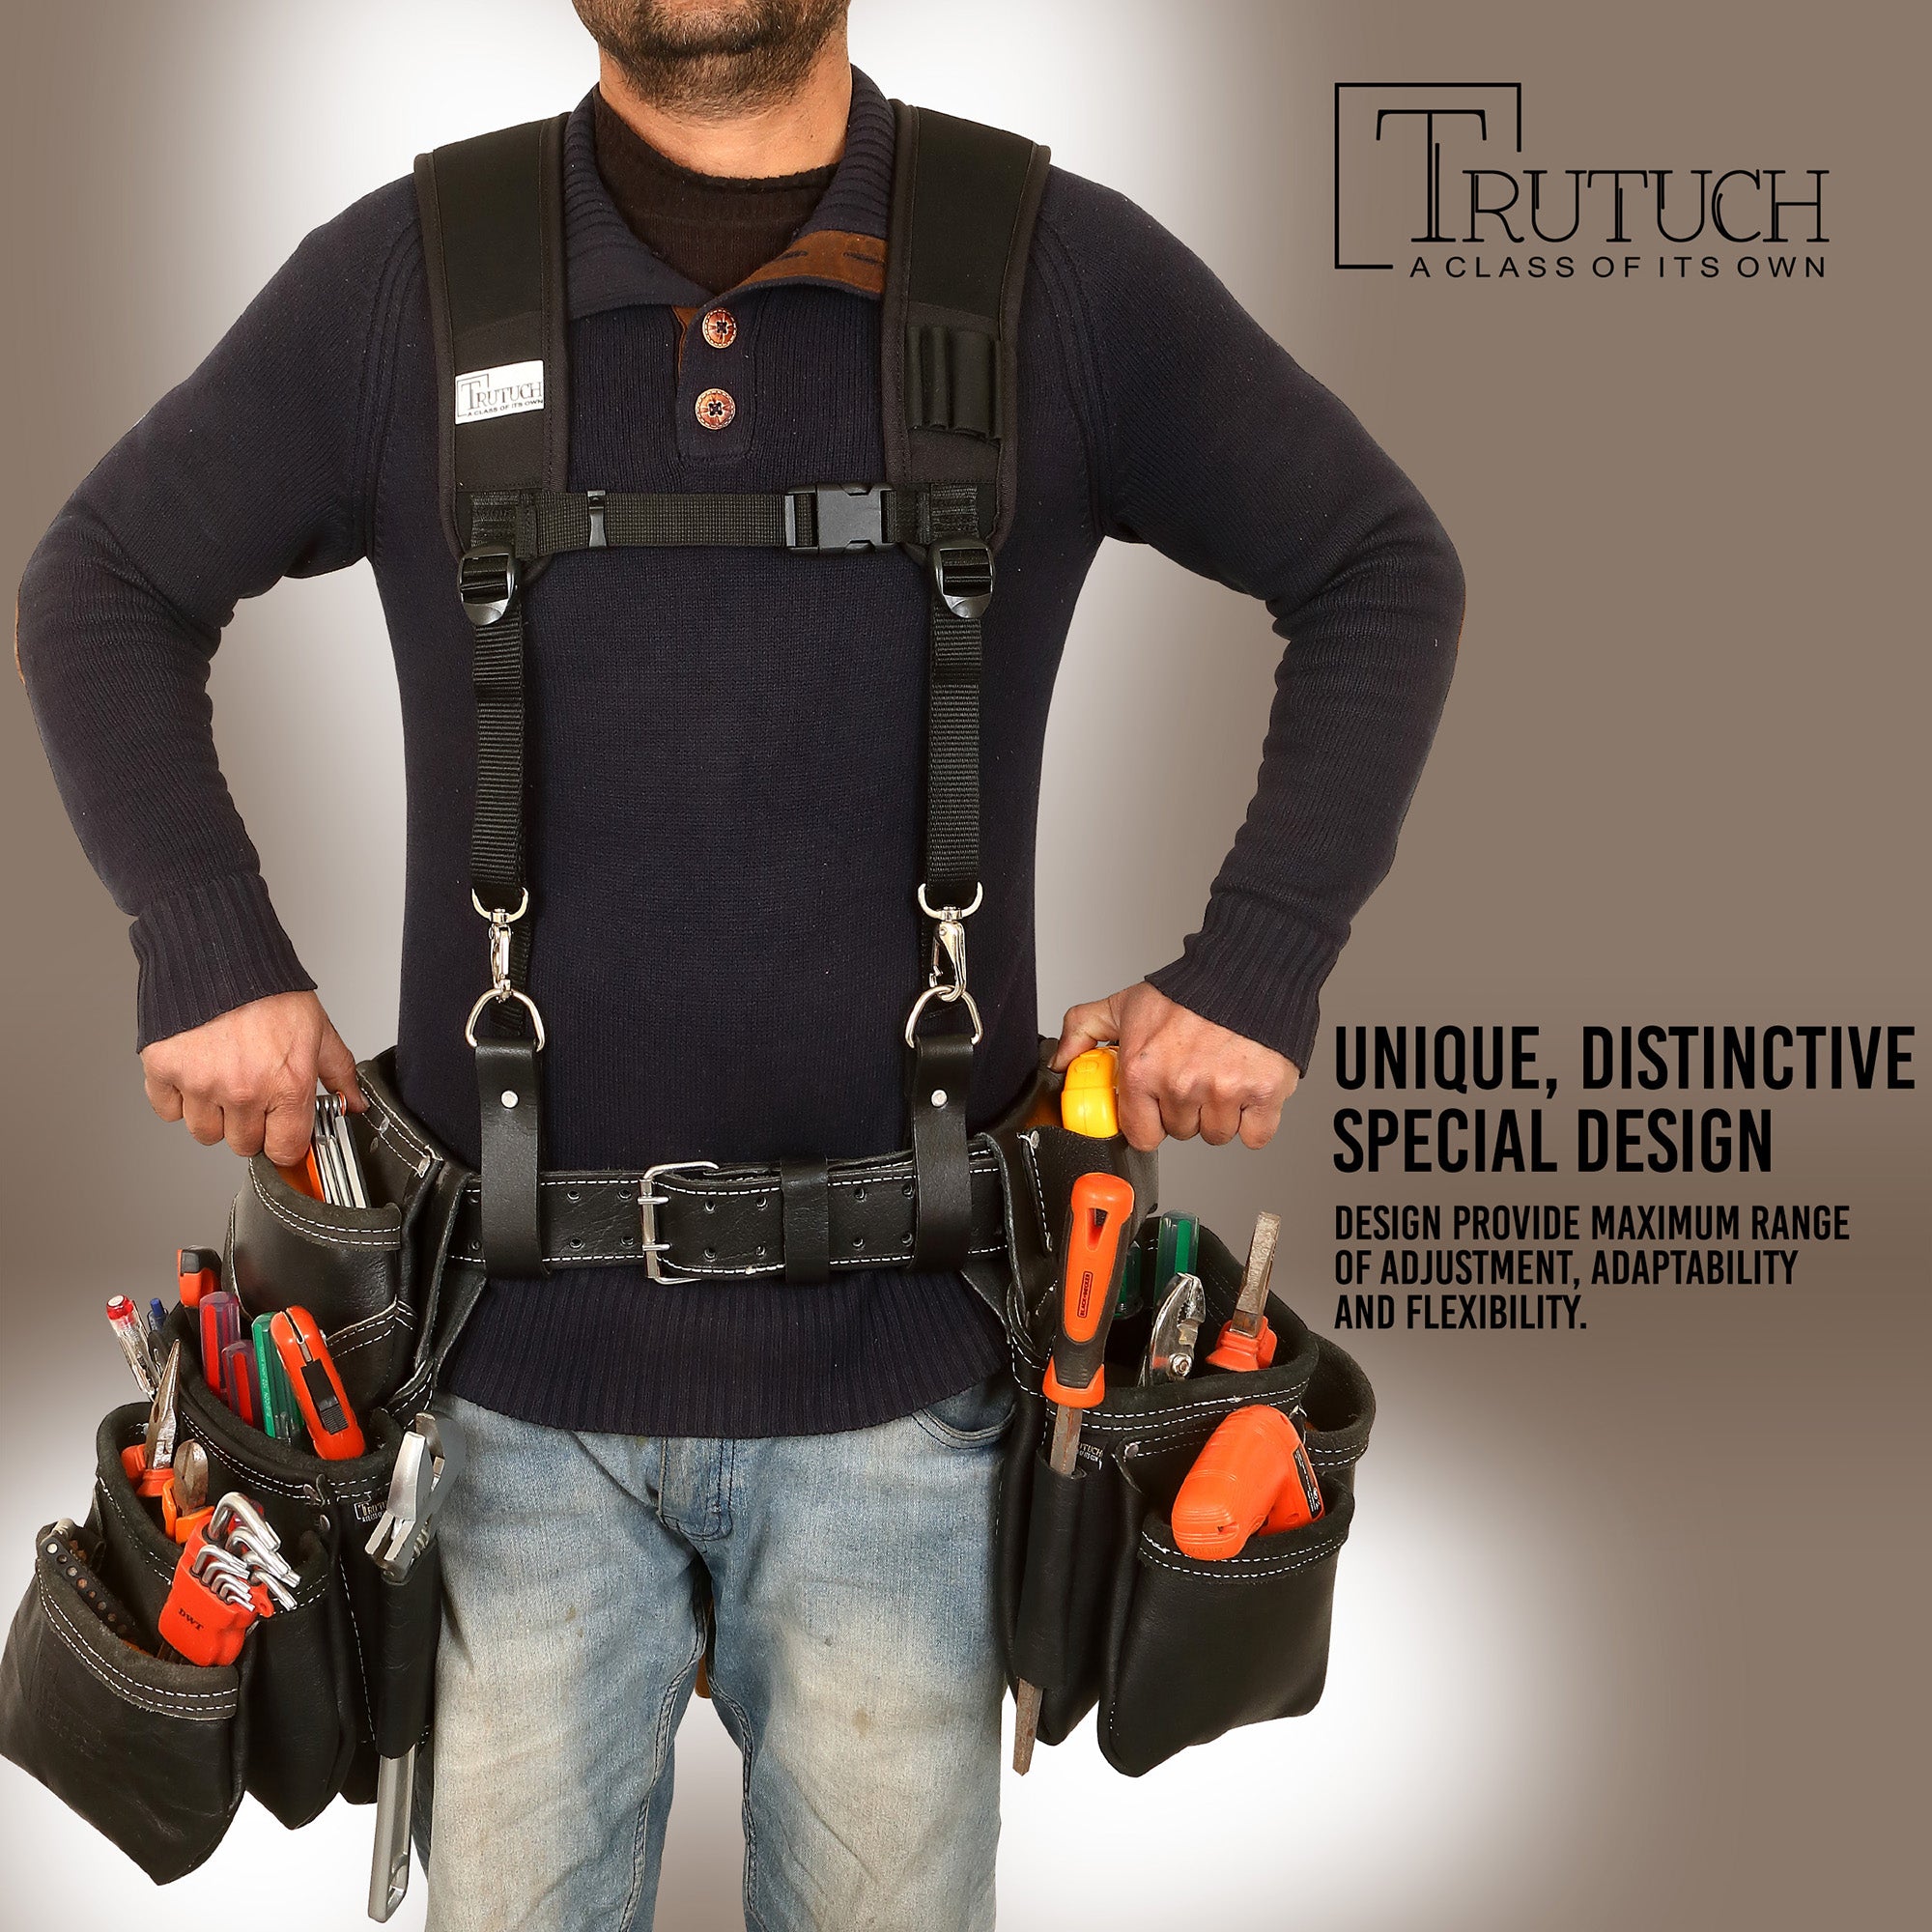 Trutuch Black Nylon Work Suspender With Pockets, Comfortable Padded Yoke Leather Tool Belt Suspenders, Stronghold Suspension System, TT-7040-S